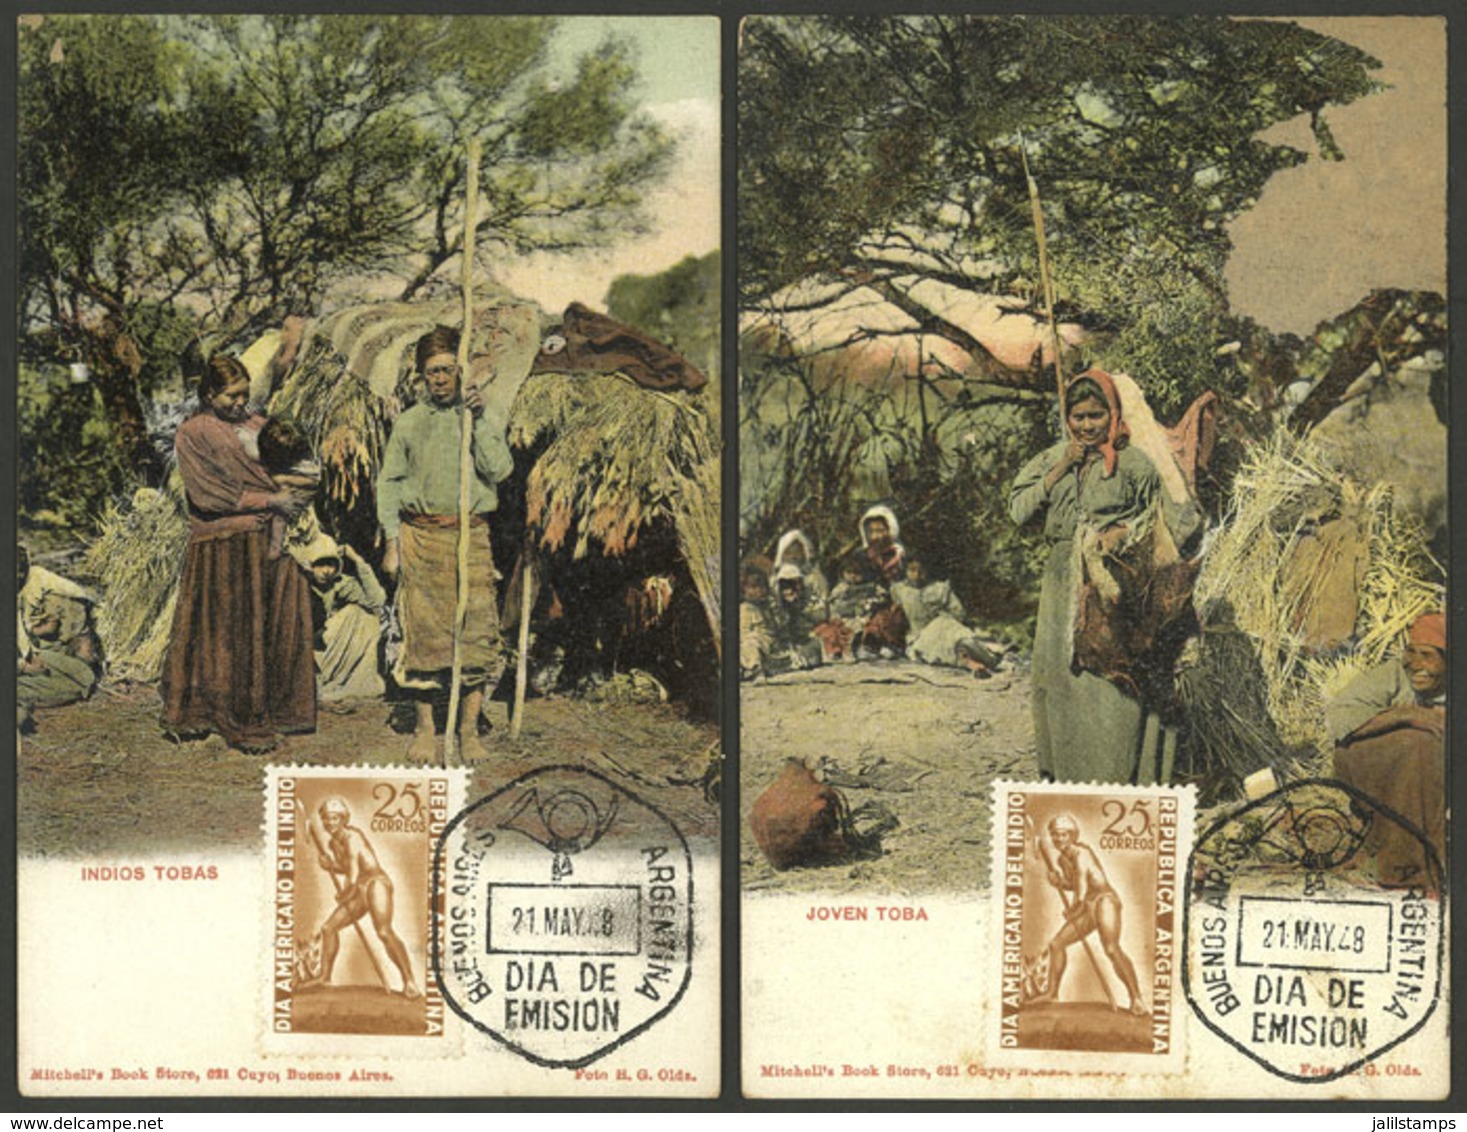 ARGENTINA: TOBA INDIANS: 2 Old Postcards With Very Good Ethnic Views, Used To Make First Day Cards Of The 1948 "Indian D - Argentine